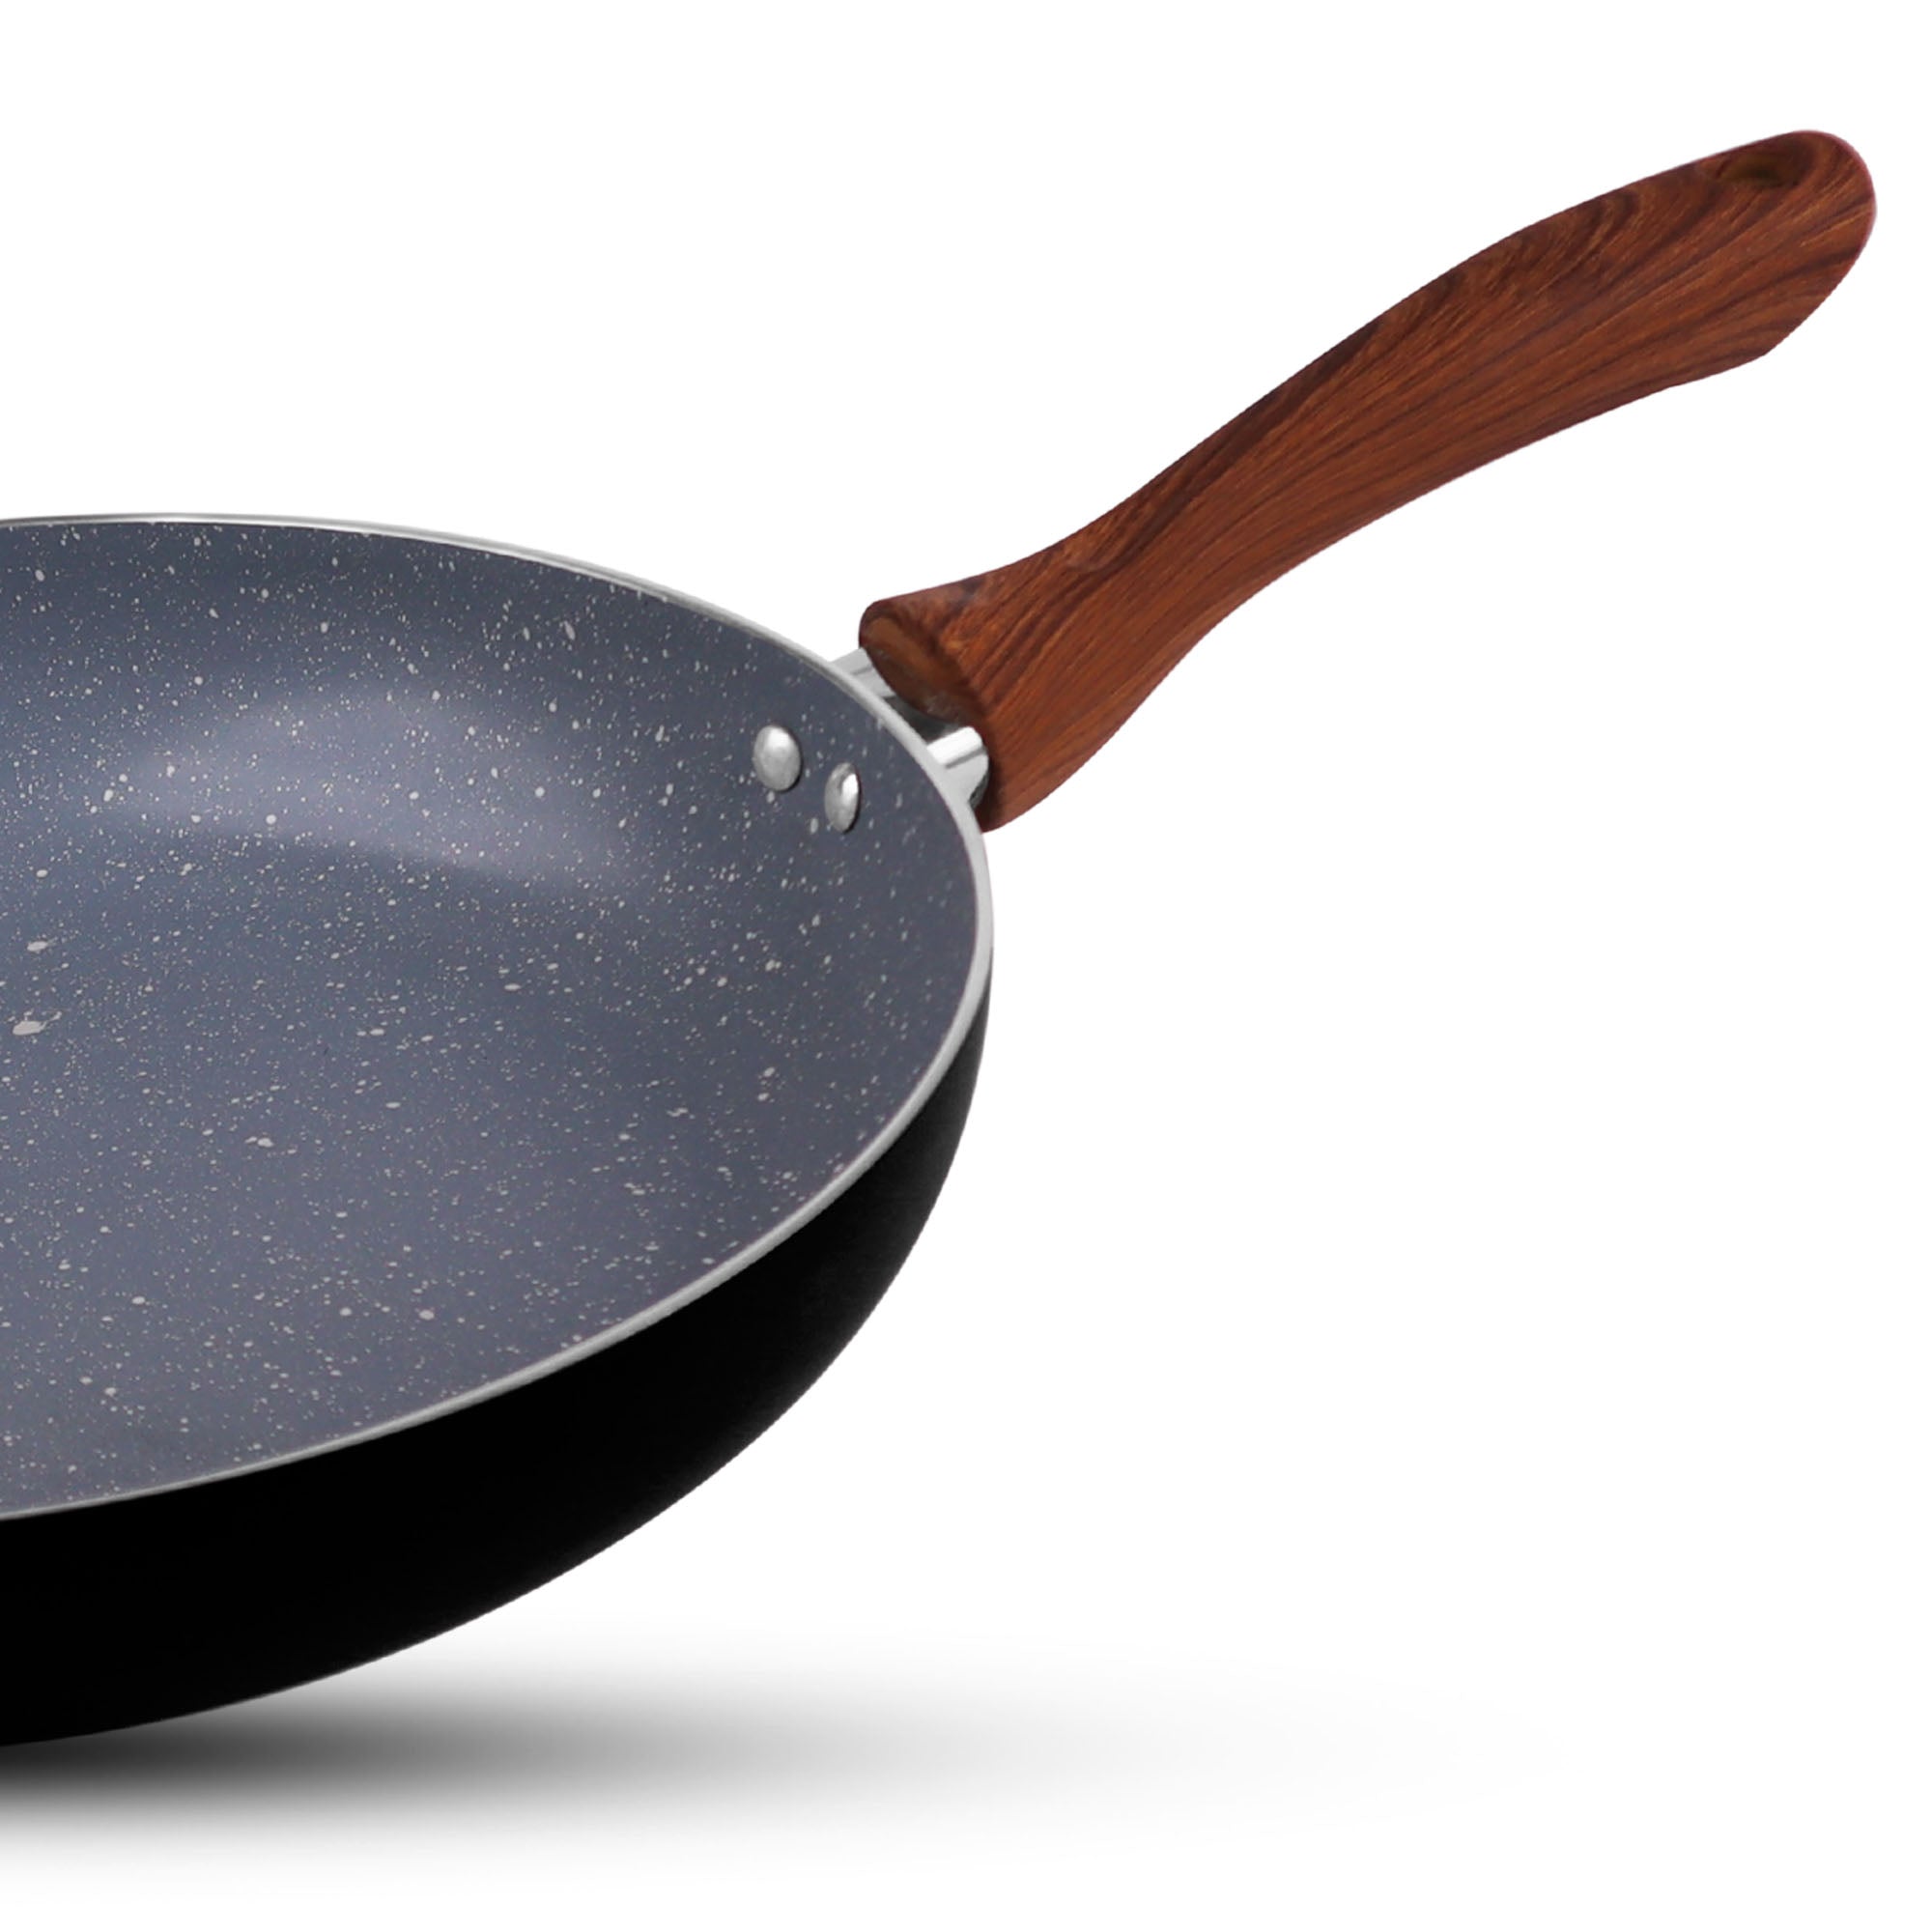 best non stick cookware brand in pakistan cooking pan non stick frying pan cooking pot in wooden texture handle - chef cookware